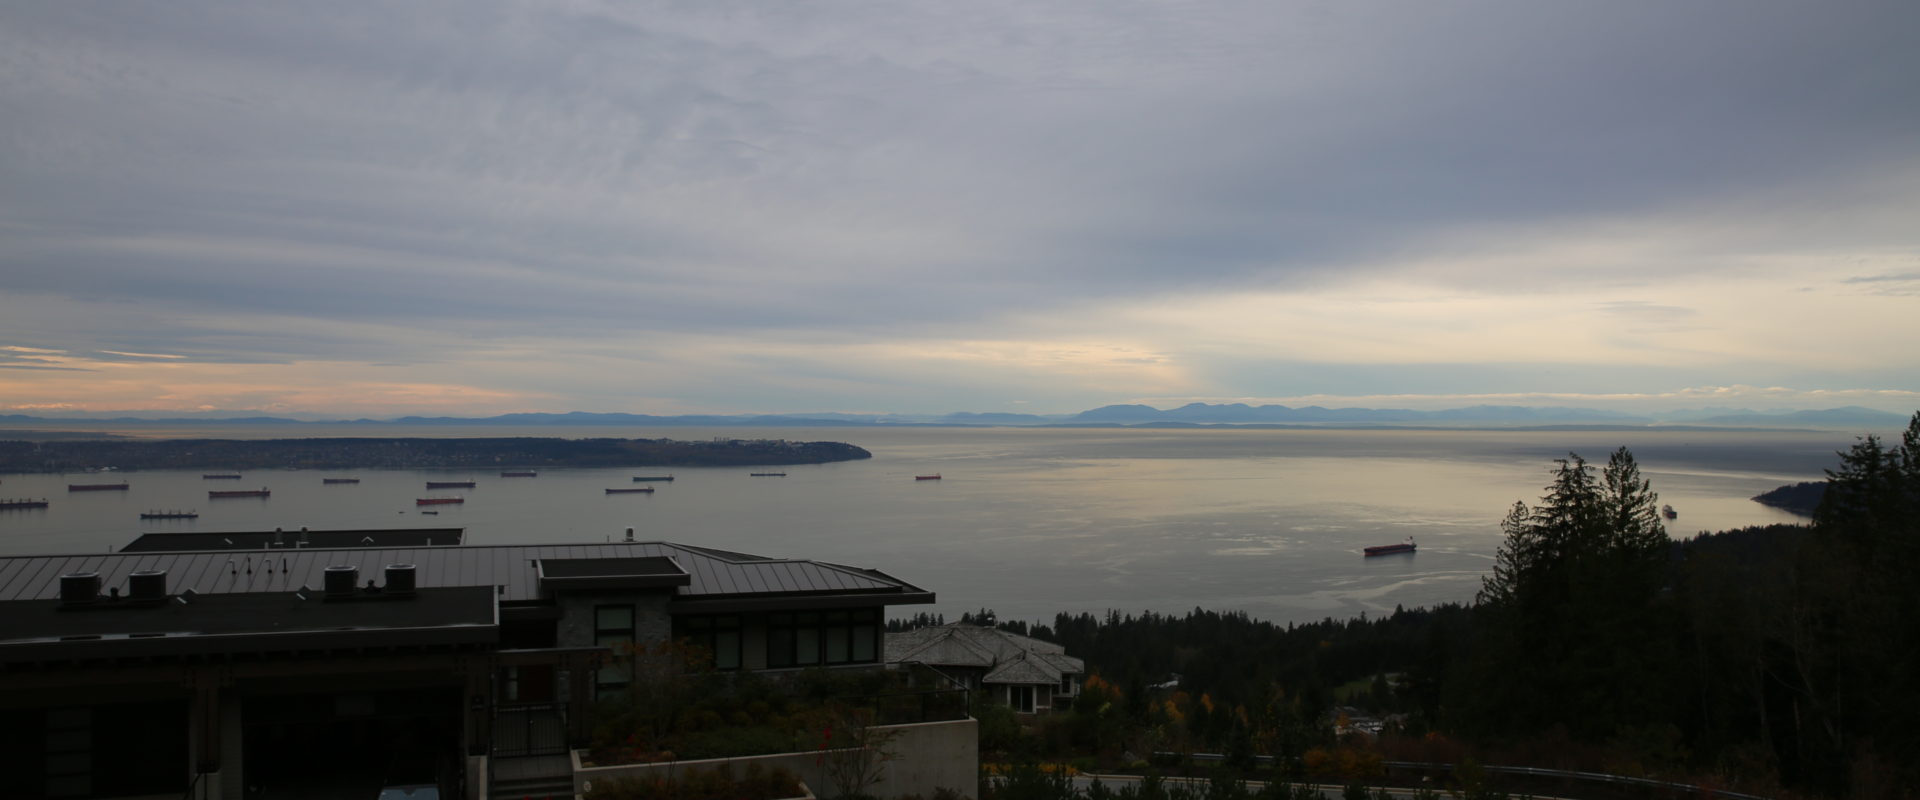 West Vancouver Luxurious 5bdrm Home with City and Ocean Views